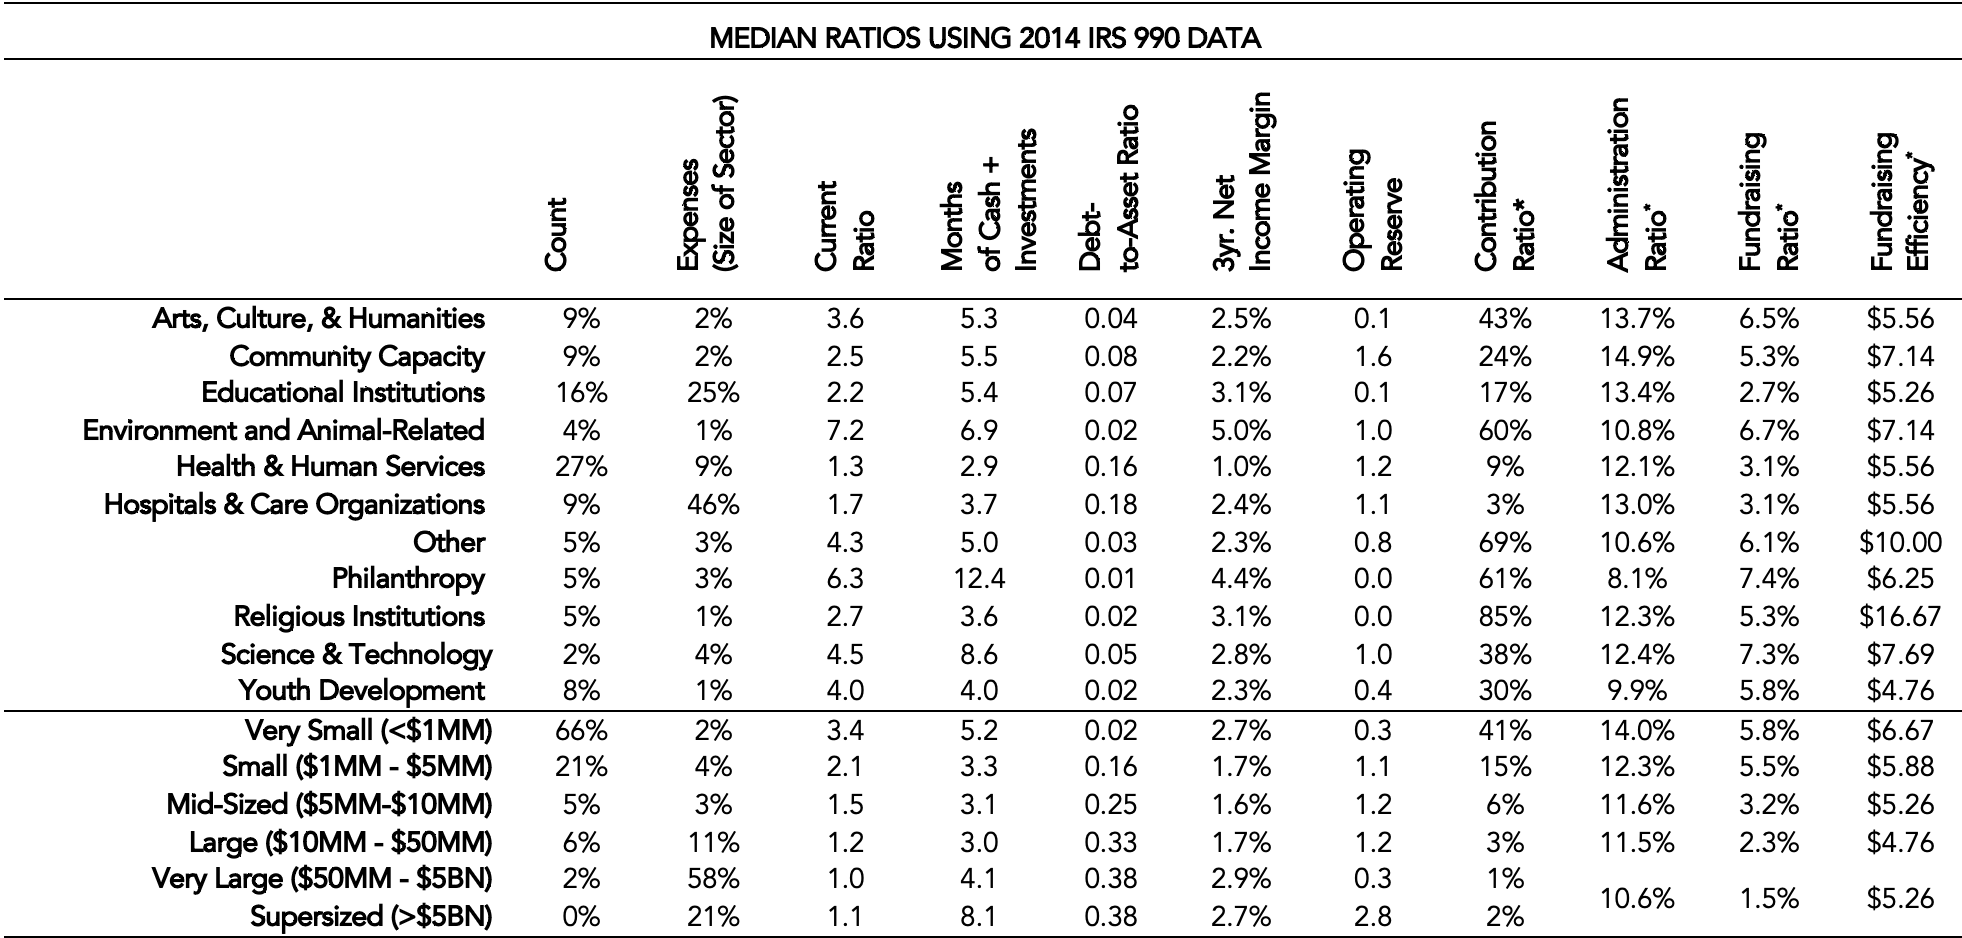 Median financial ratios for non-profits by sector and size using 2014 IRS 990 data.